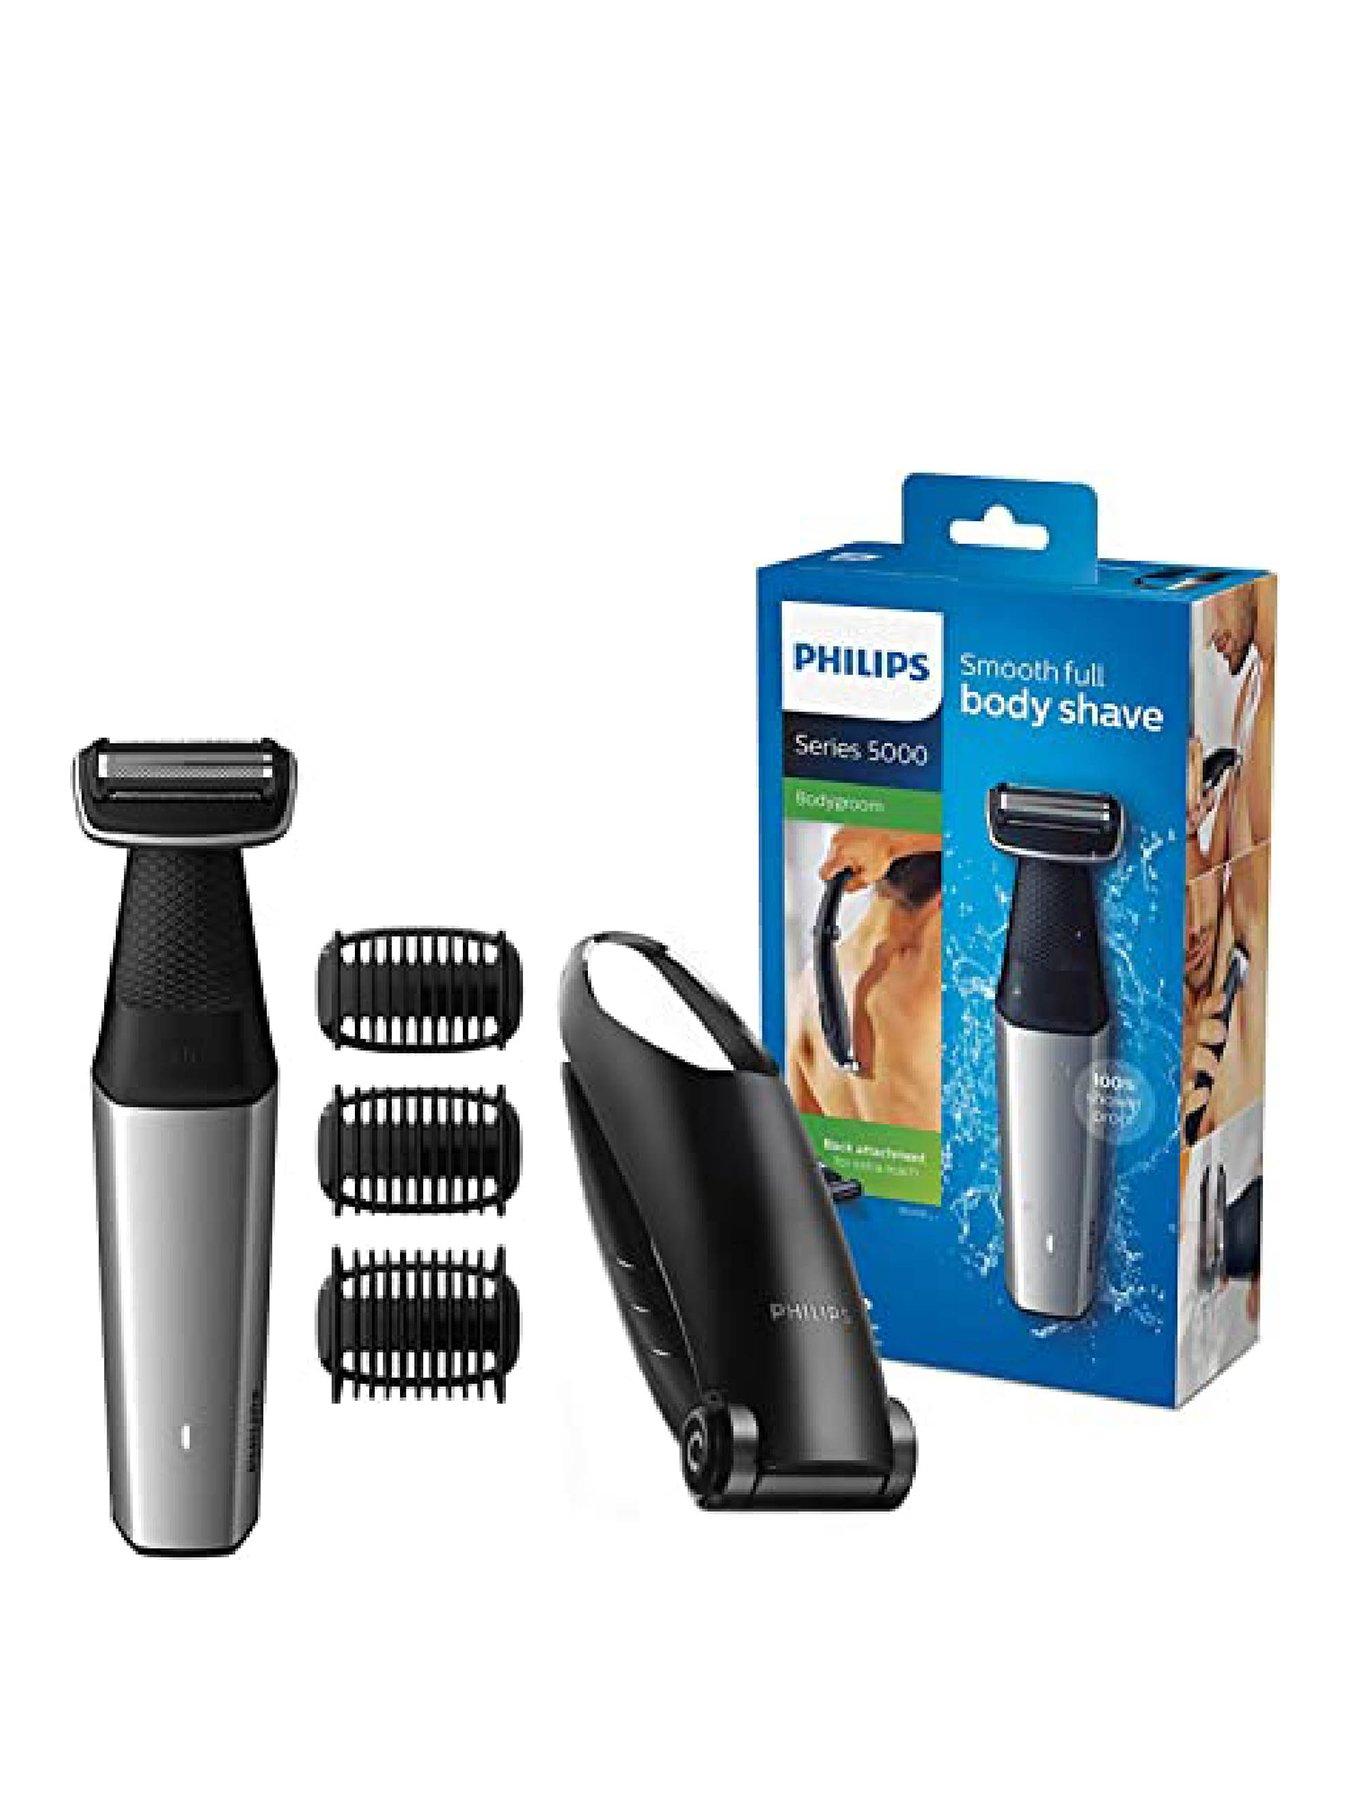 Philips Series 5000 Cordless and Showerproof Body Groomer with